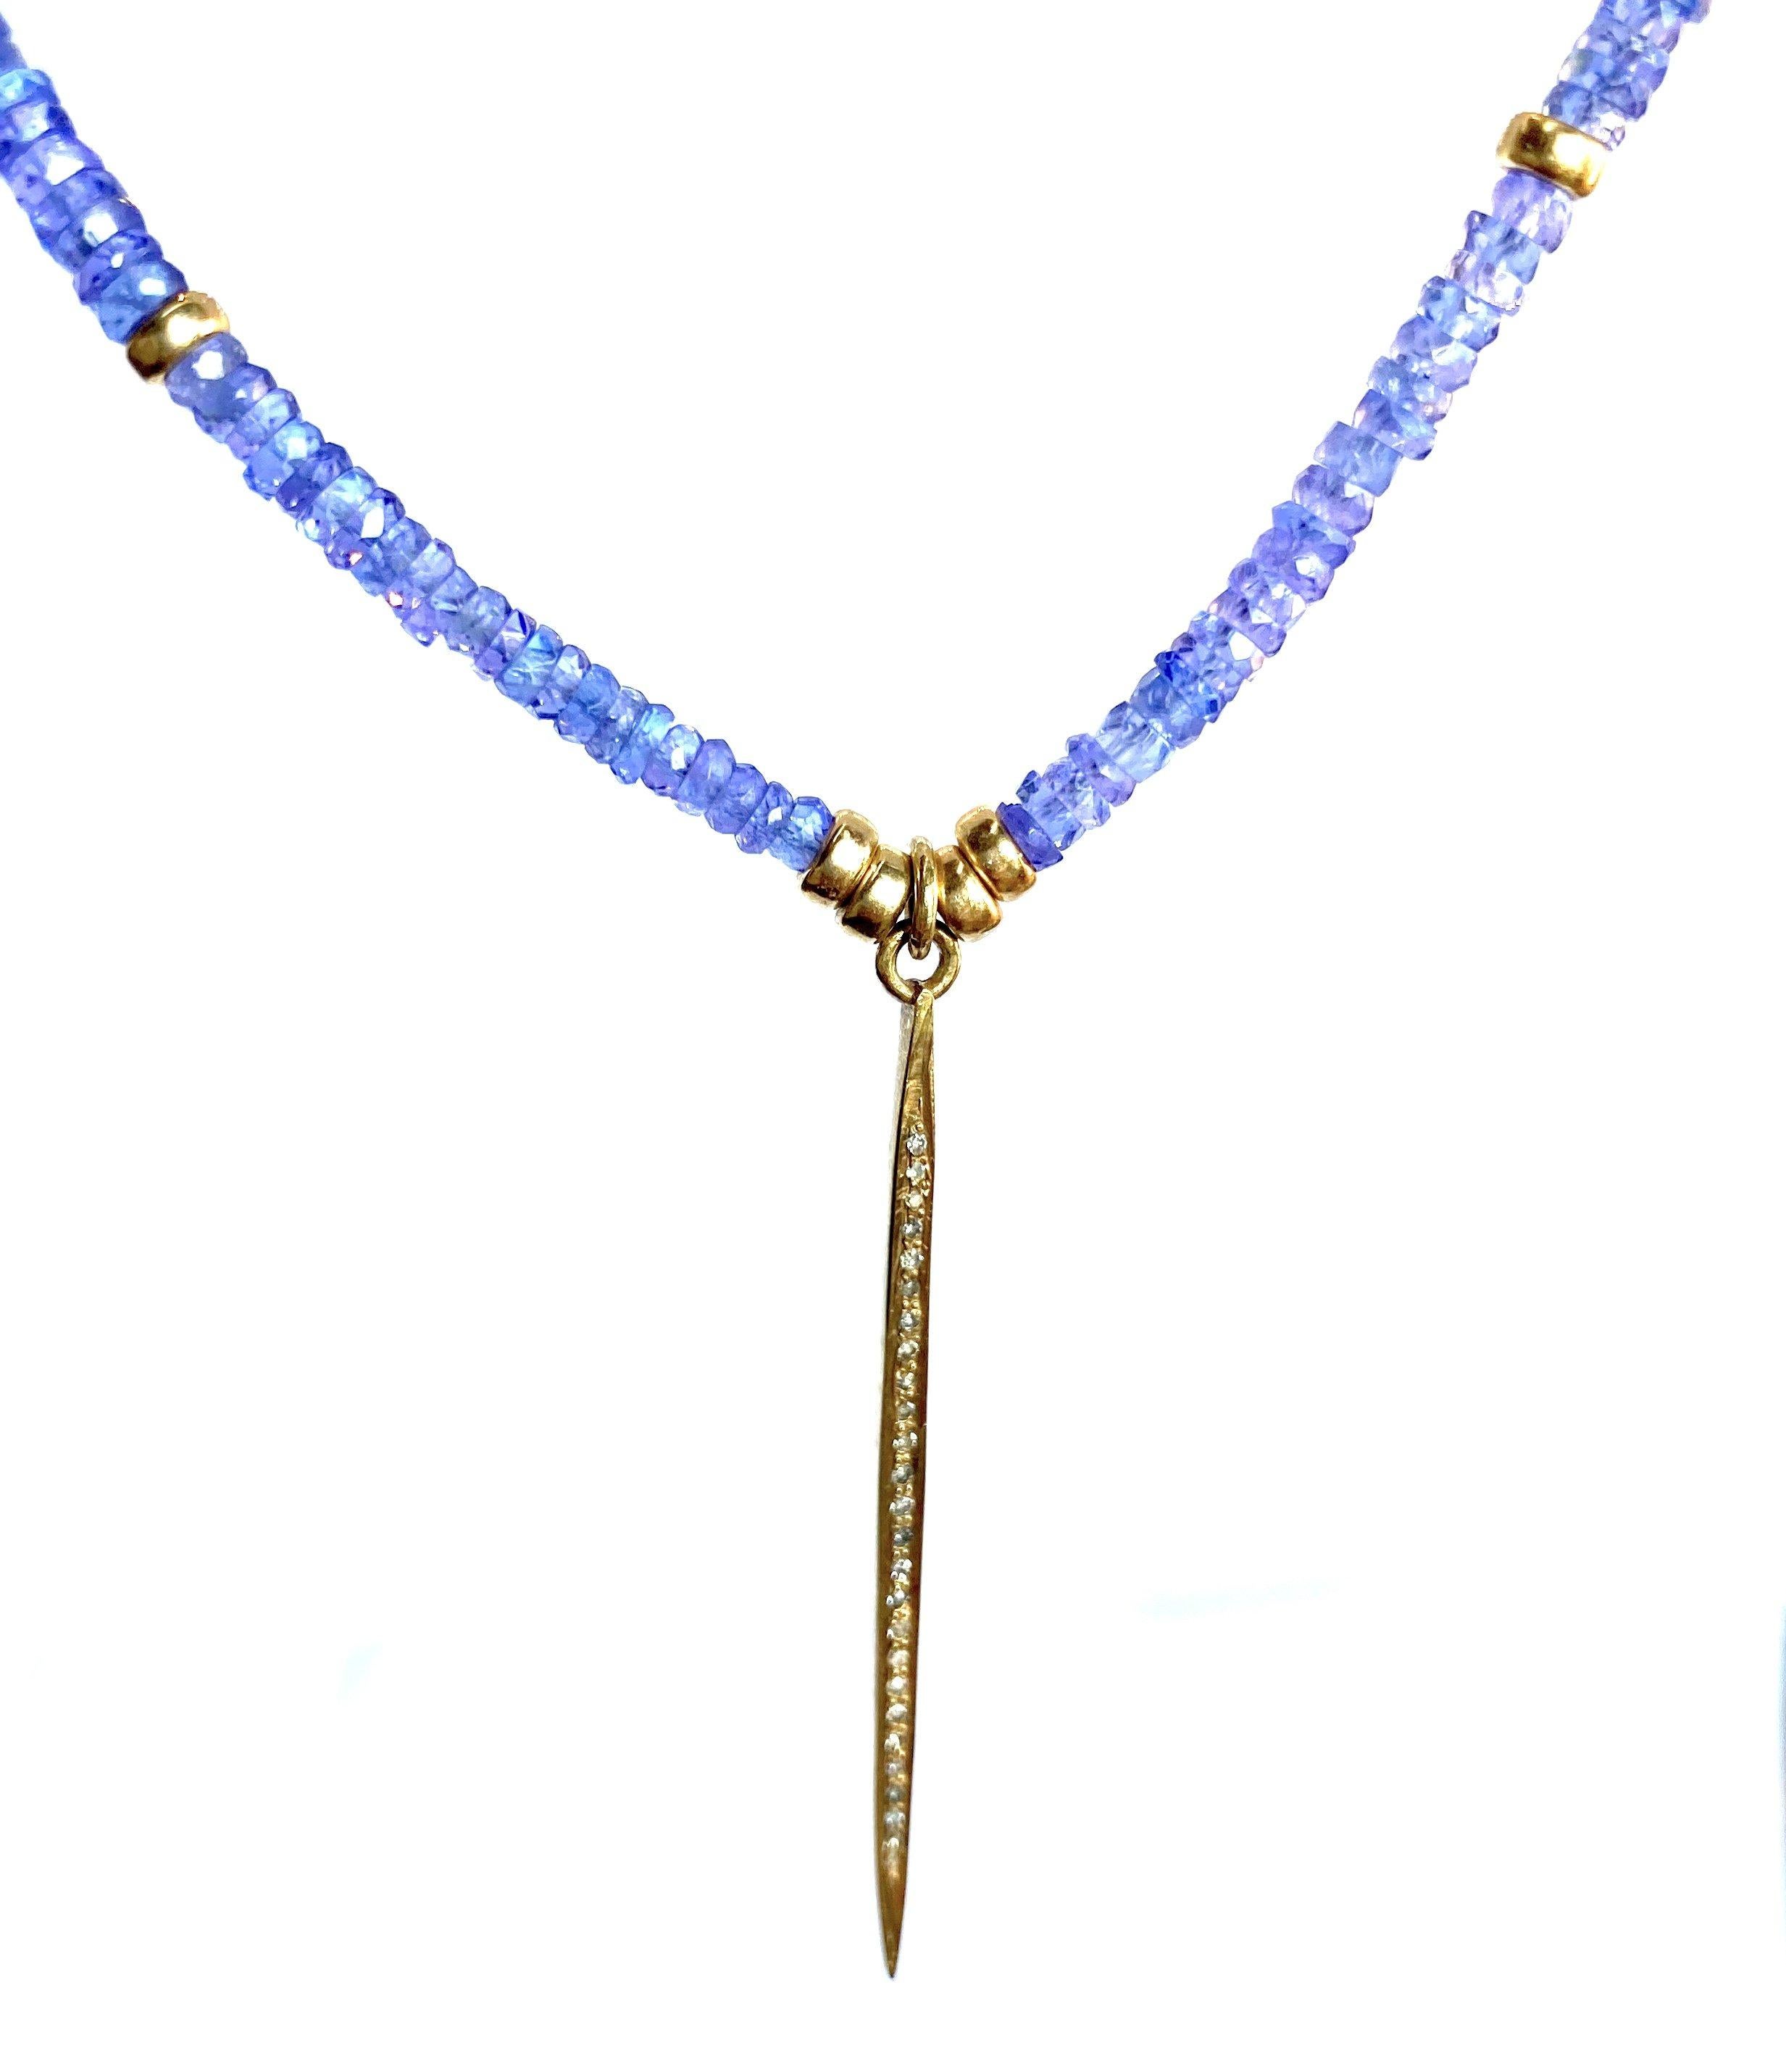 Story Behind the Jewelry
Tanzanite is a magical stone with its lilac-blue colors.  The necklace is adorned with 14K gold accents and a pave diamond gold pendant.  The is dear to Jada Jo as she climbed Mt. Kilimanjaro in Tanzania a few years back. 